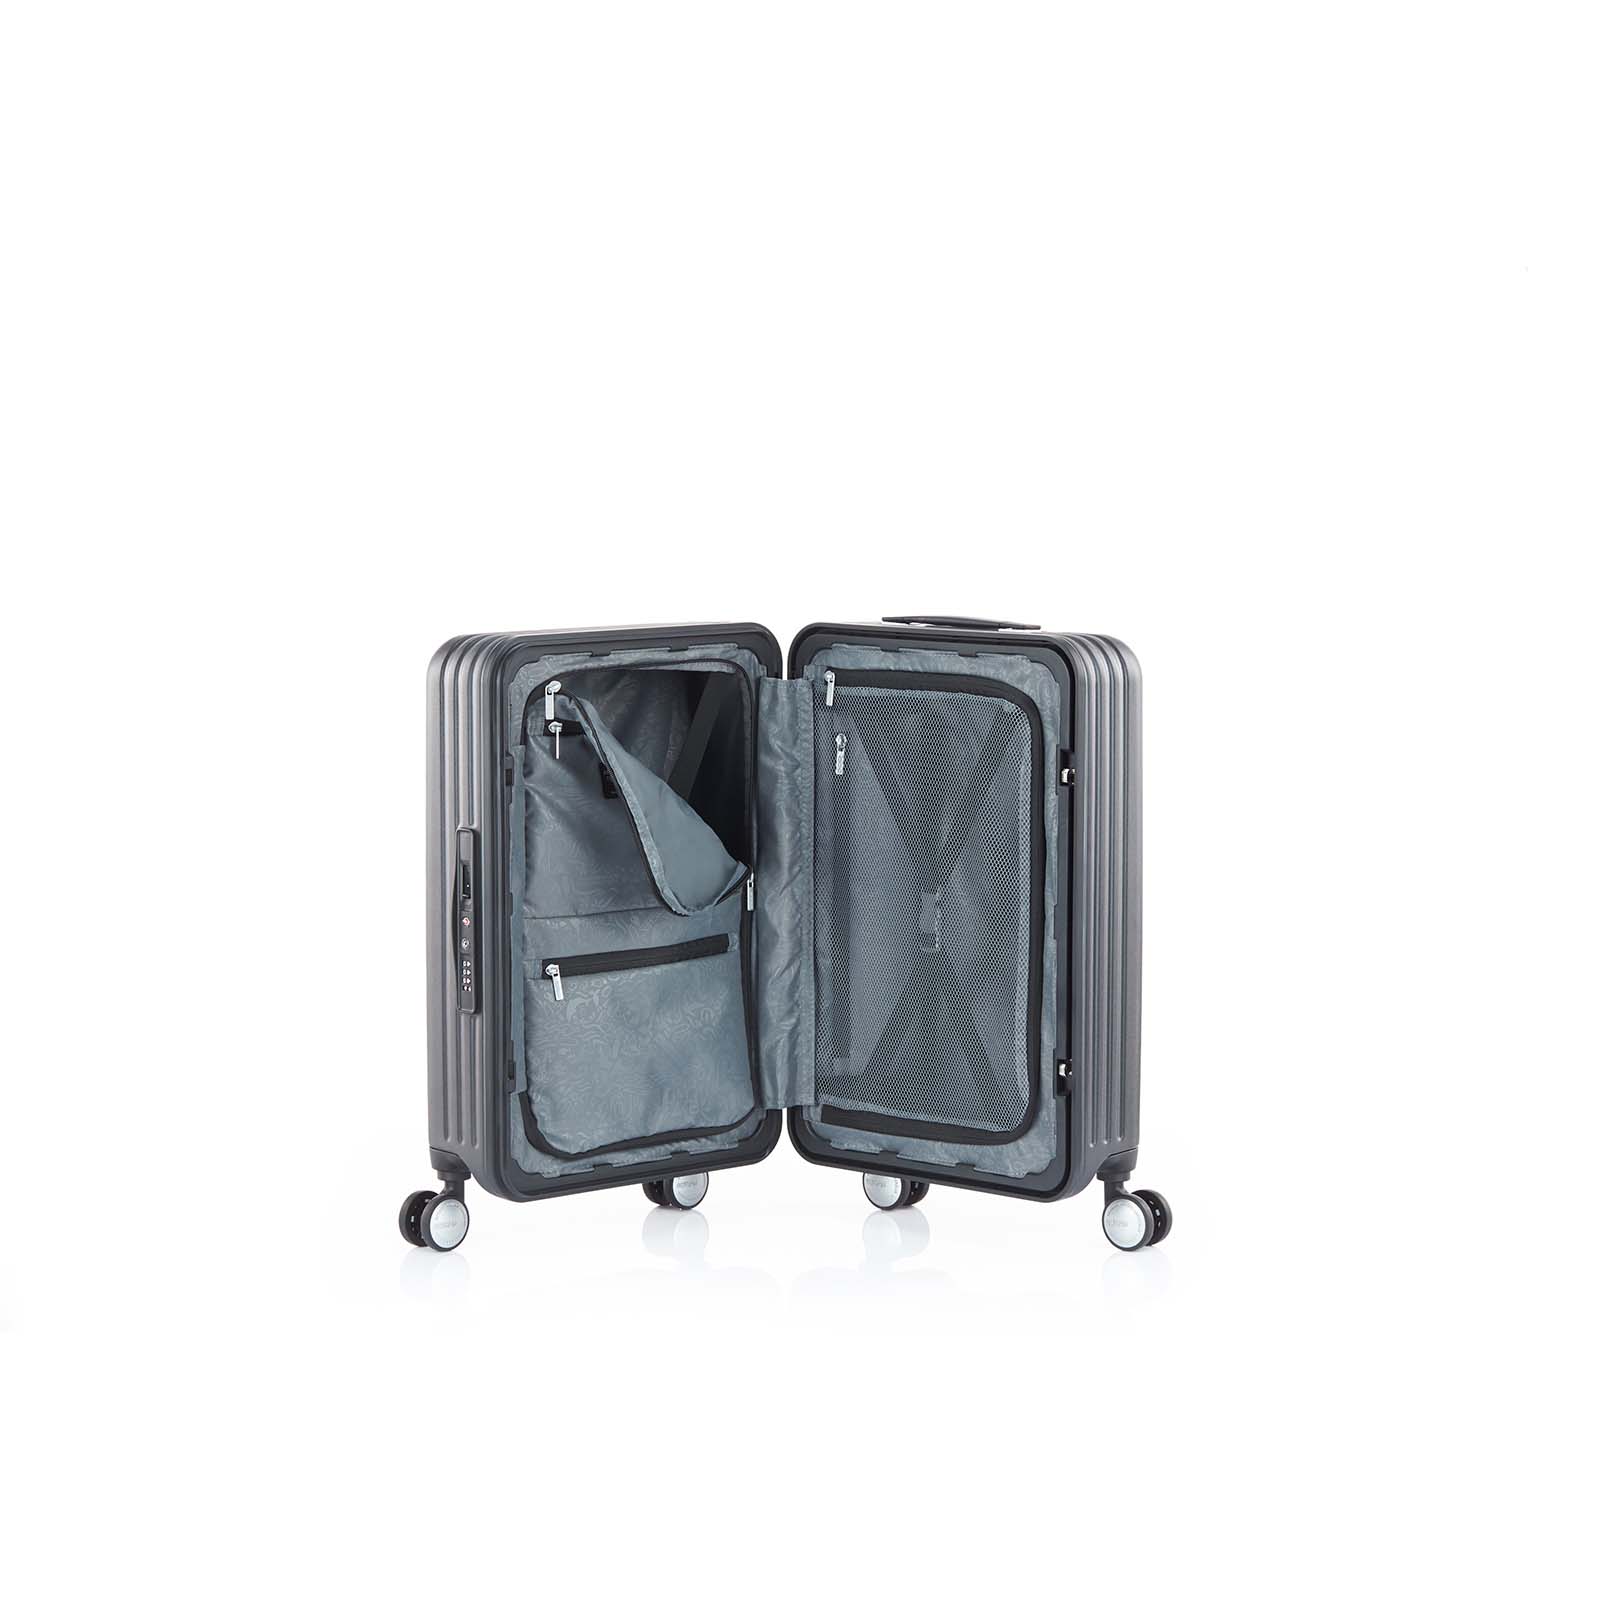 American-Tourister-Lockation-55cm-Carry-On-Suitcase-Black-Open